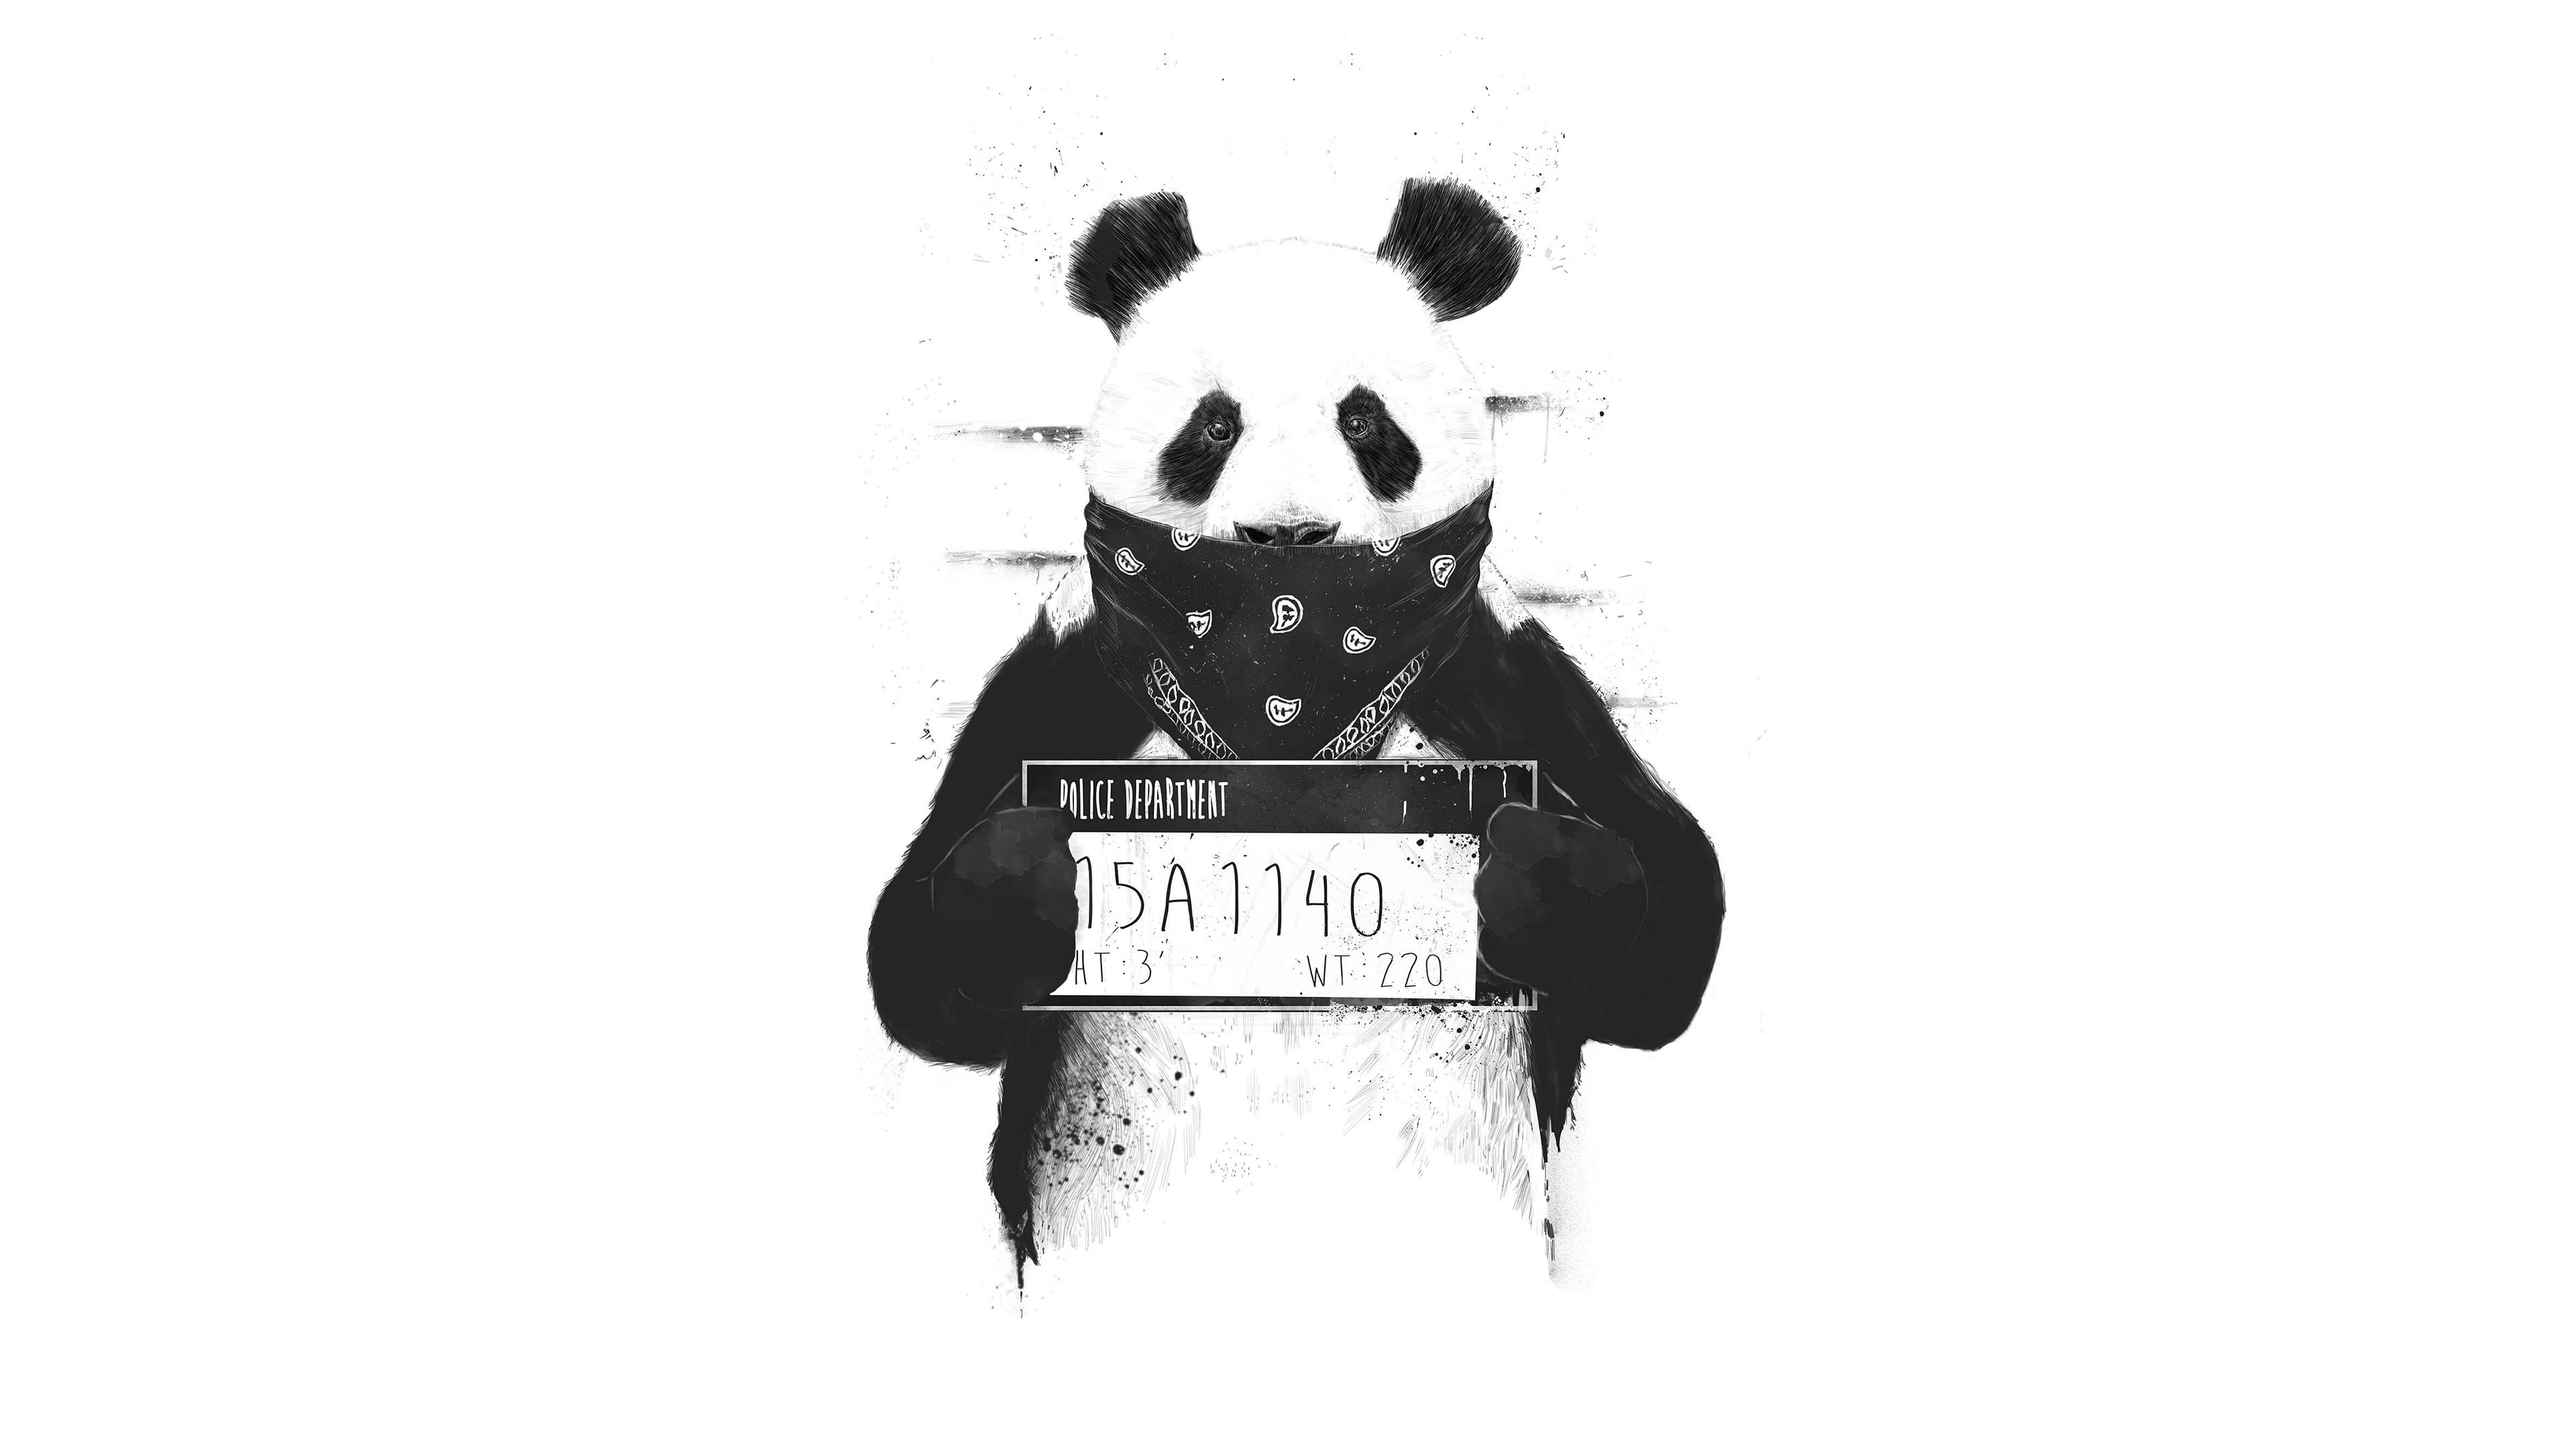 Bad Panda, HD Artist, 4k Wallpaper, Image, Background, Photo and Picture